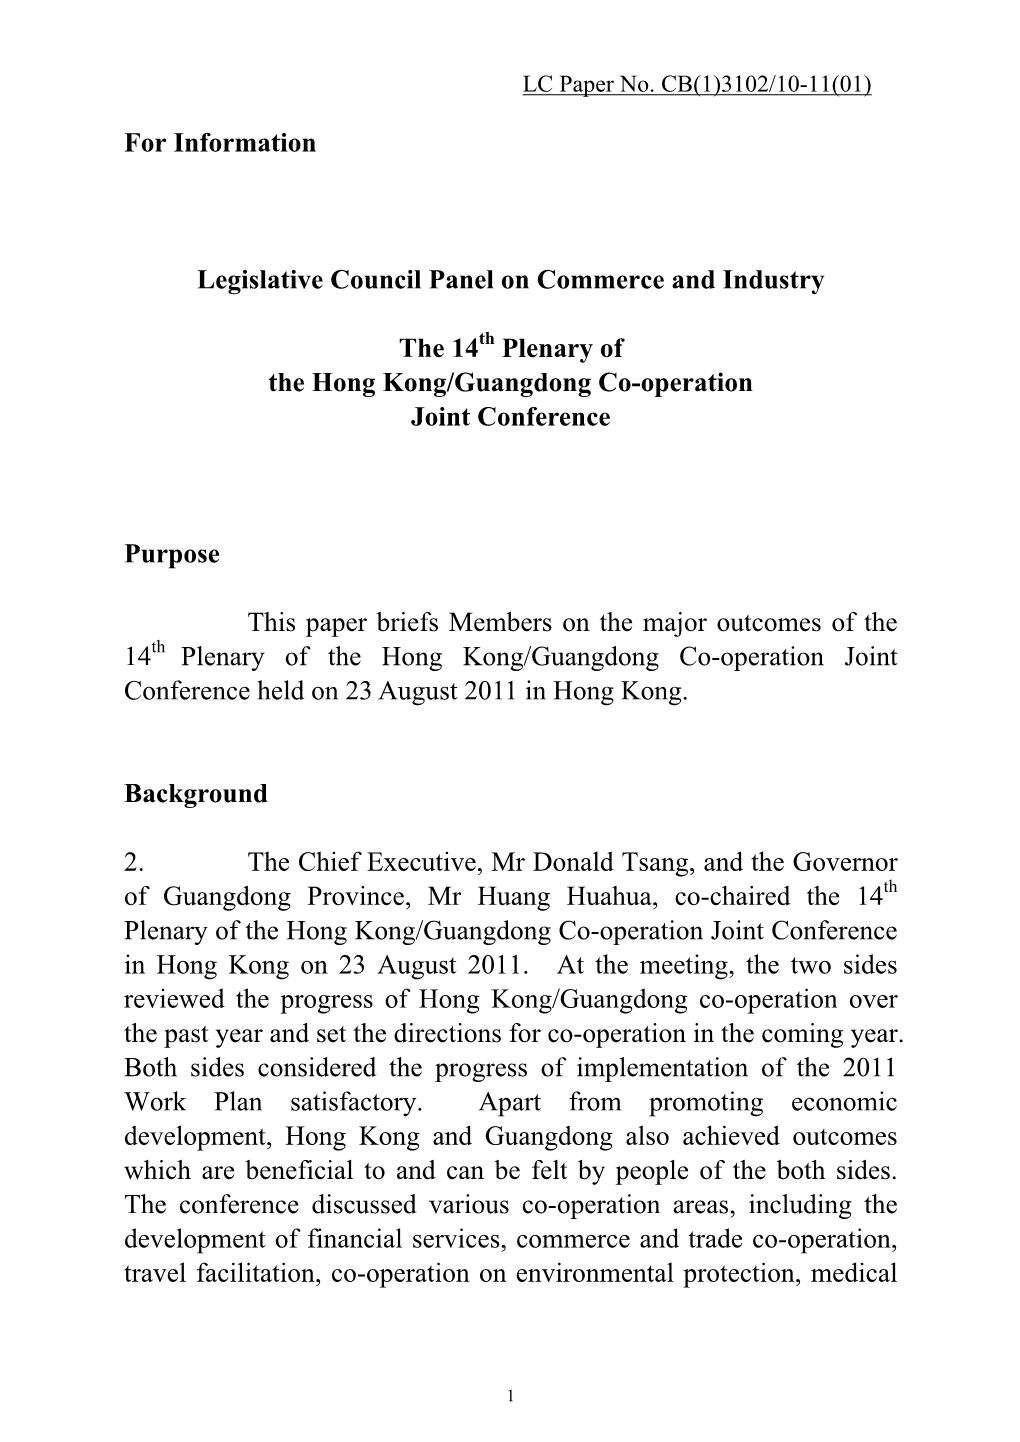 The 14Th Plenary of the Hong Kong/Guangdong Co-Operation Joint Conference